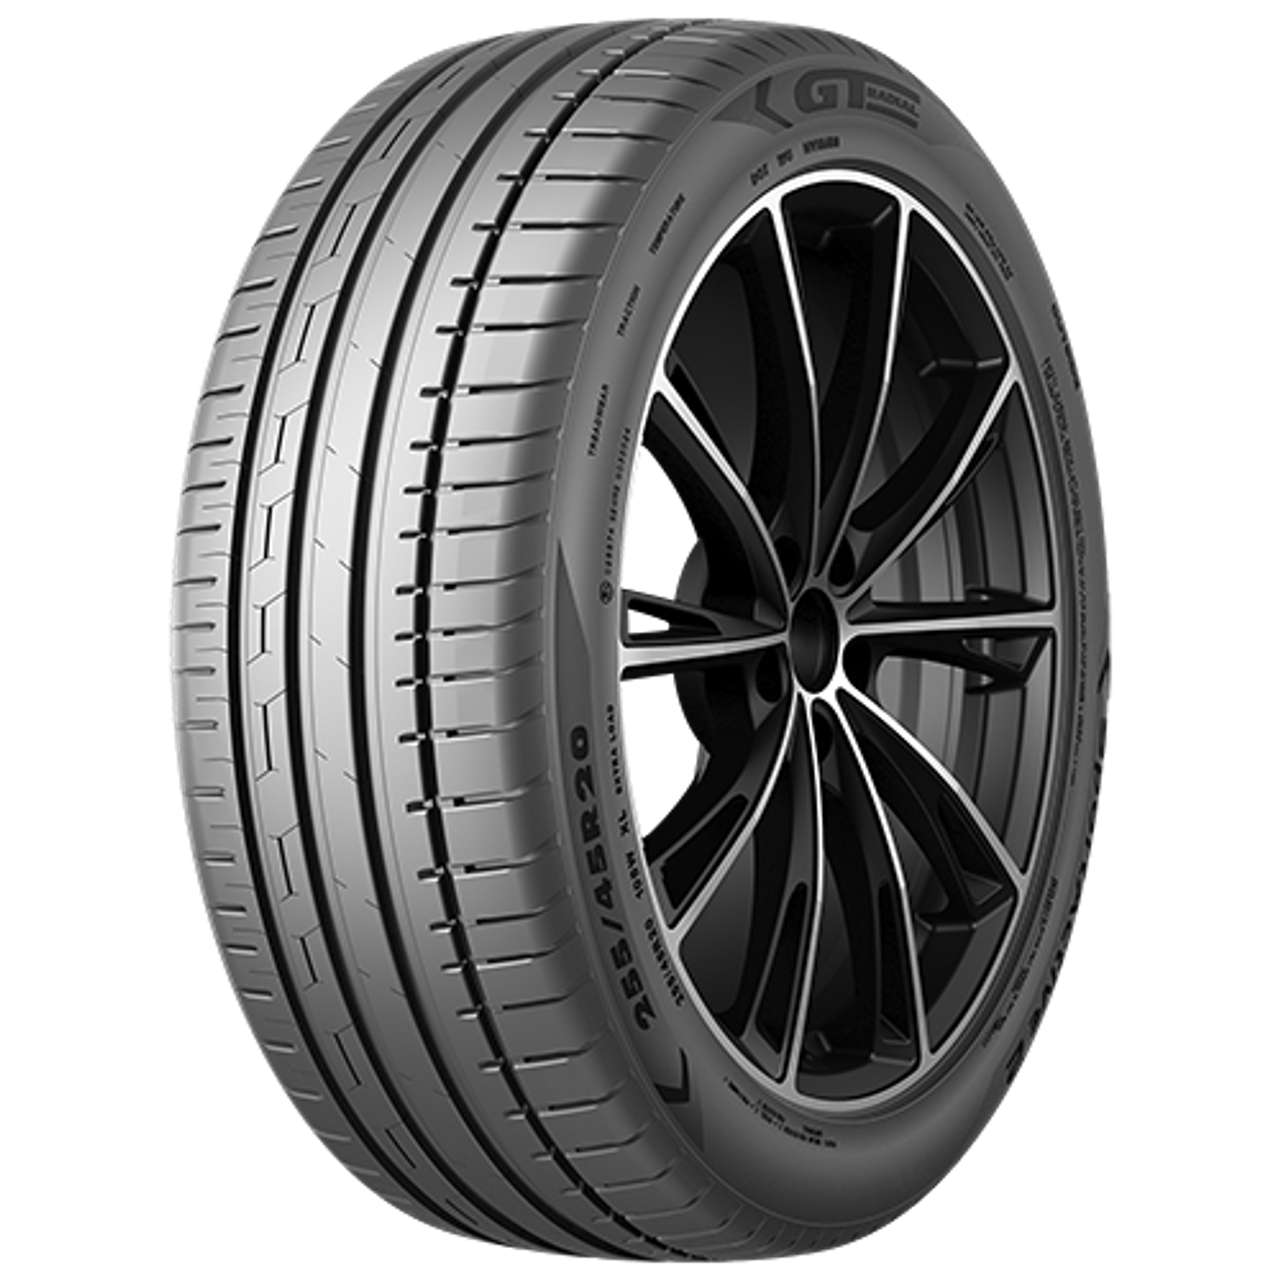 GT-RADIAL SPORTACTIVE 2 215/40R17 87W BSW XL